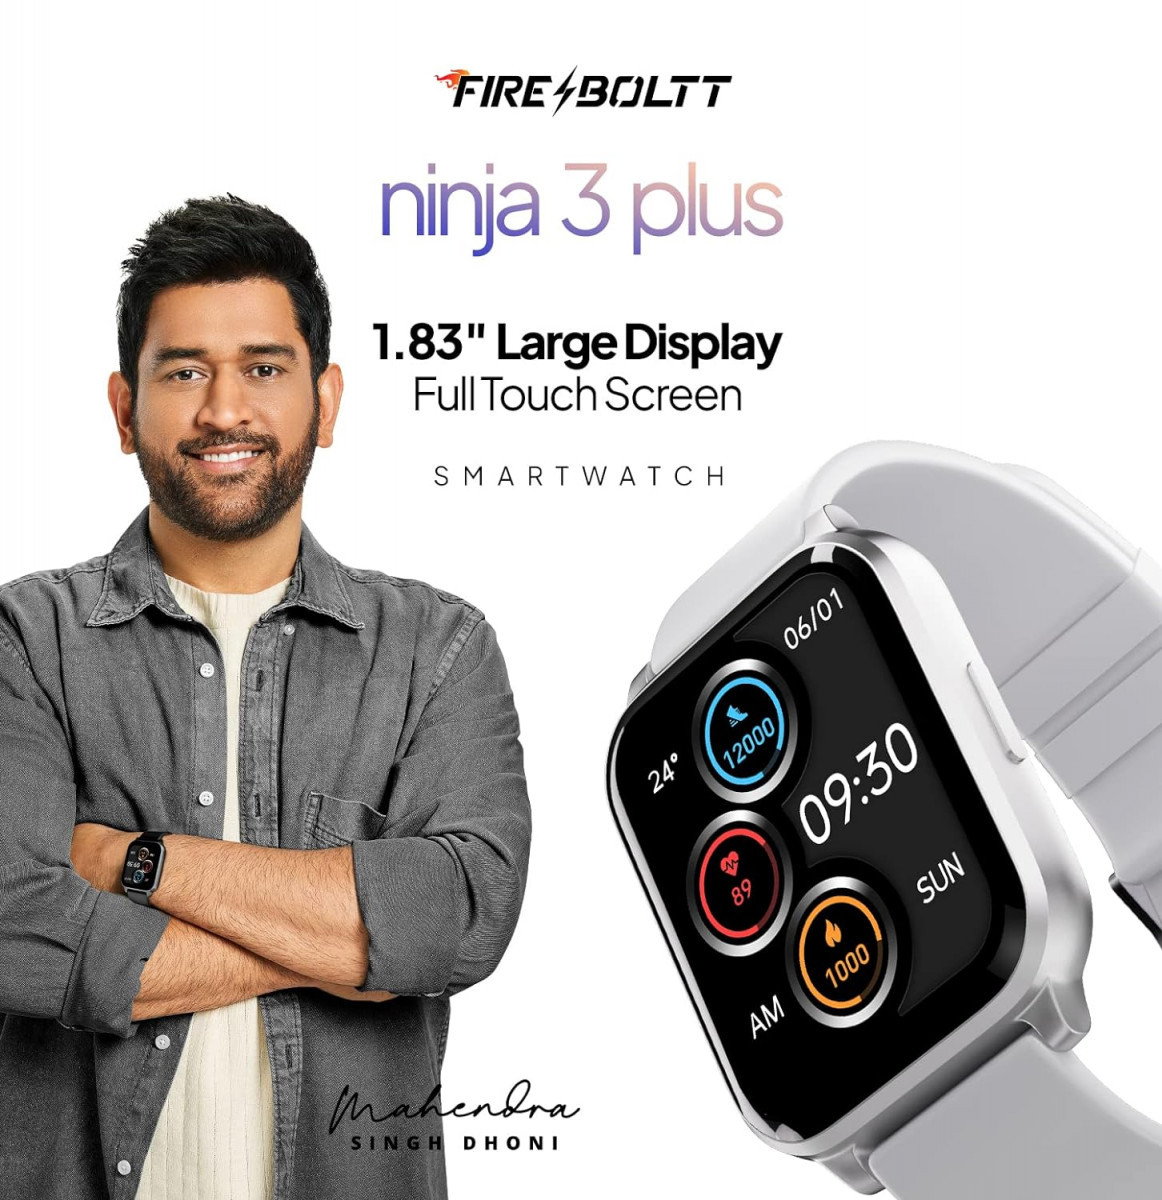 Fire-Boltt Ninja 3 Plus 183 Display Smartwatch Full Touch with 100 Sports Modes with IP68 Sp02 Tracking Over 100 Cloud Based Watch Faces Grey